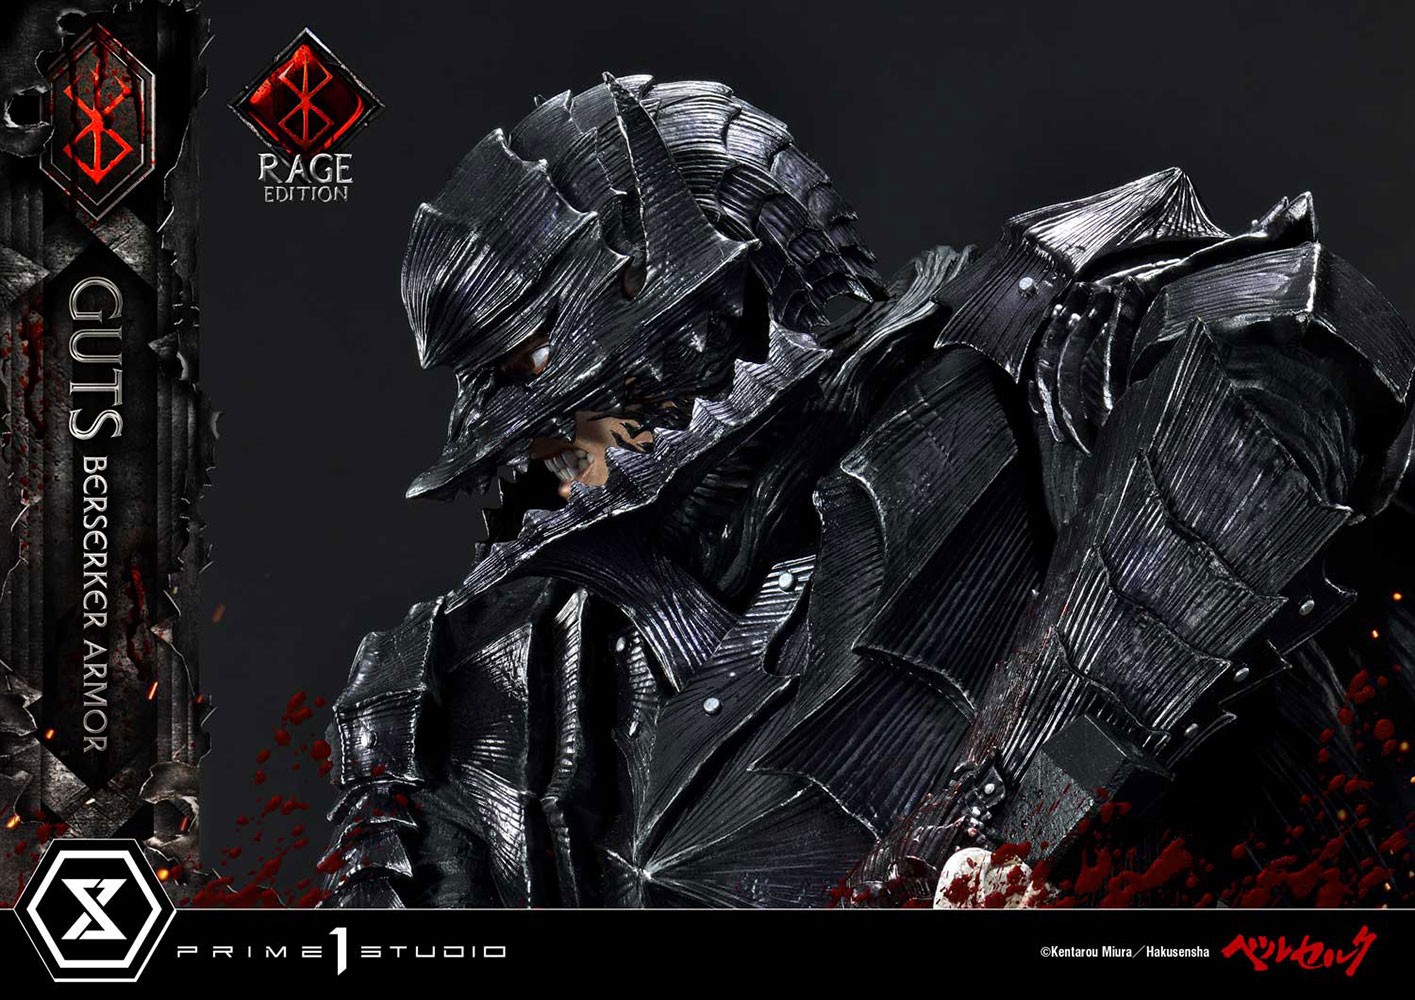 Guts Berserker Armor (Rage Edition) Collector Edition (Prototype Shown) View 25